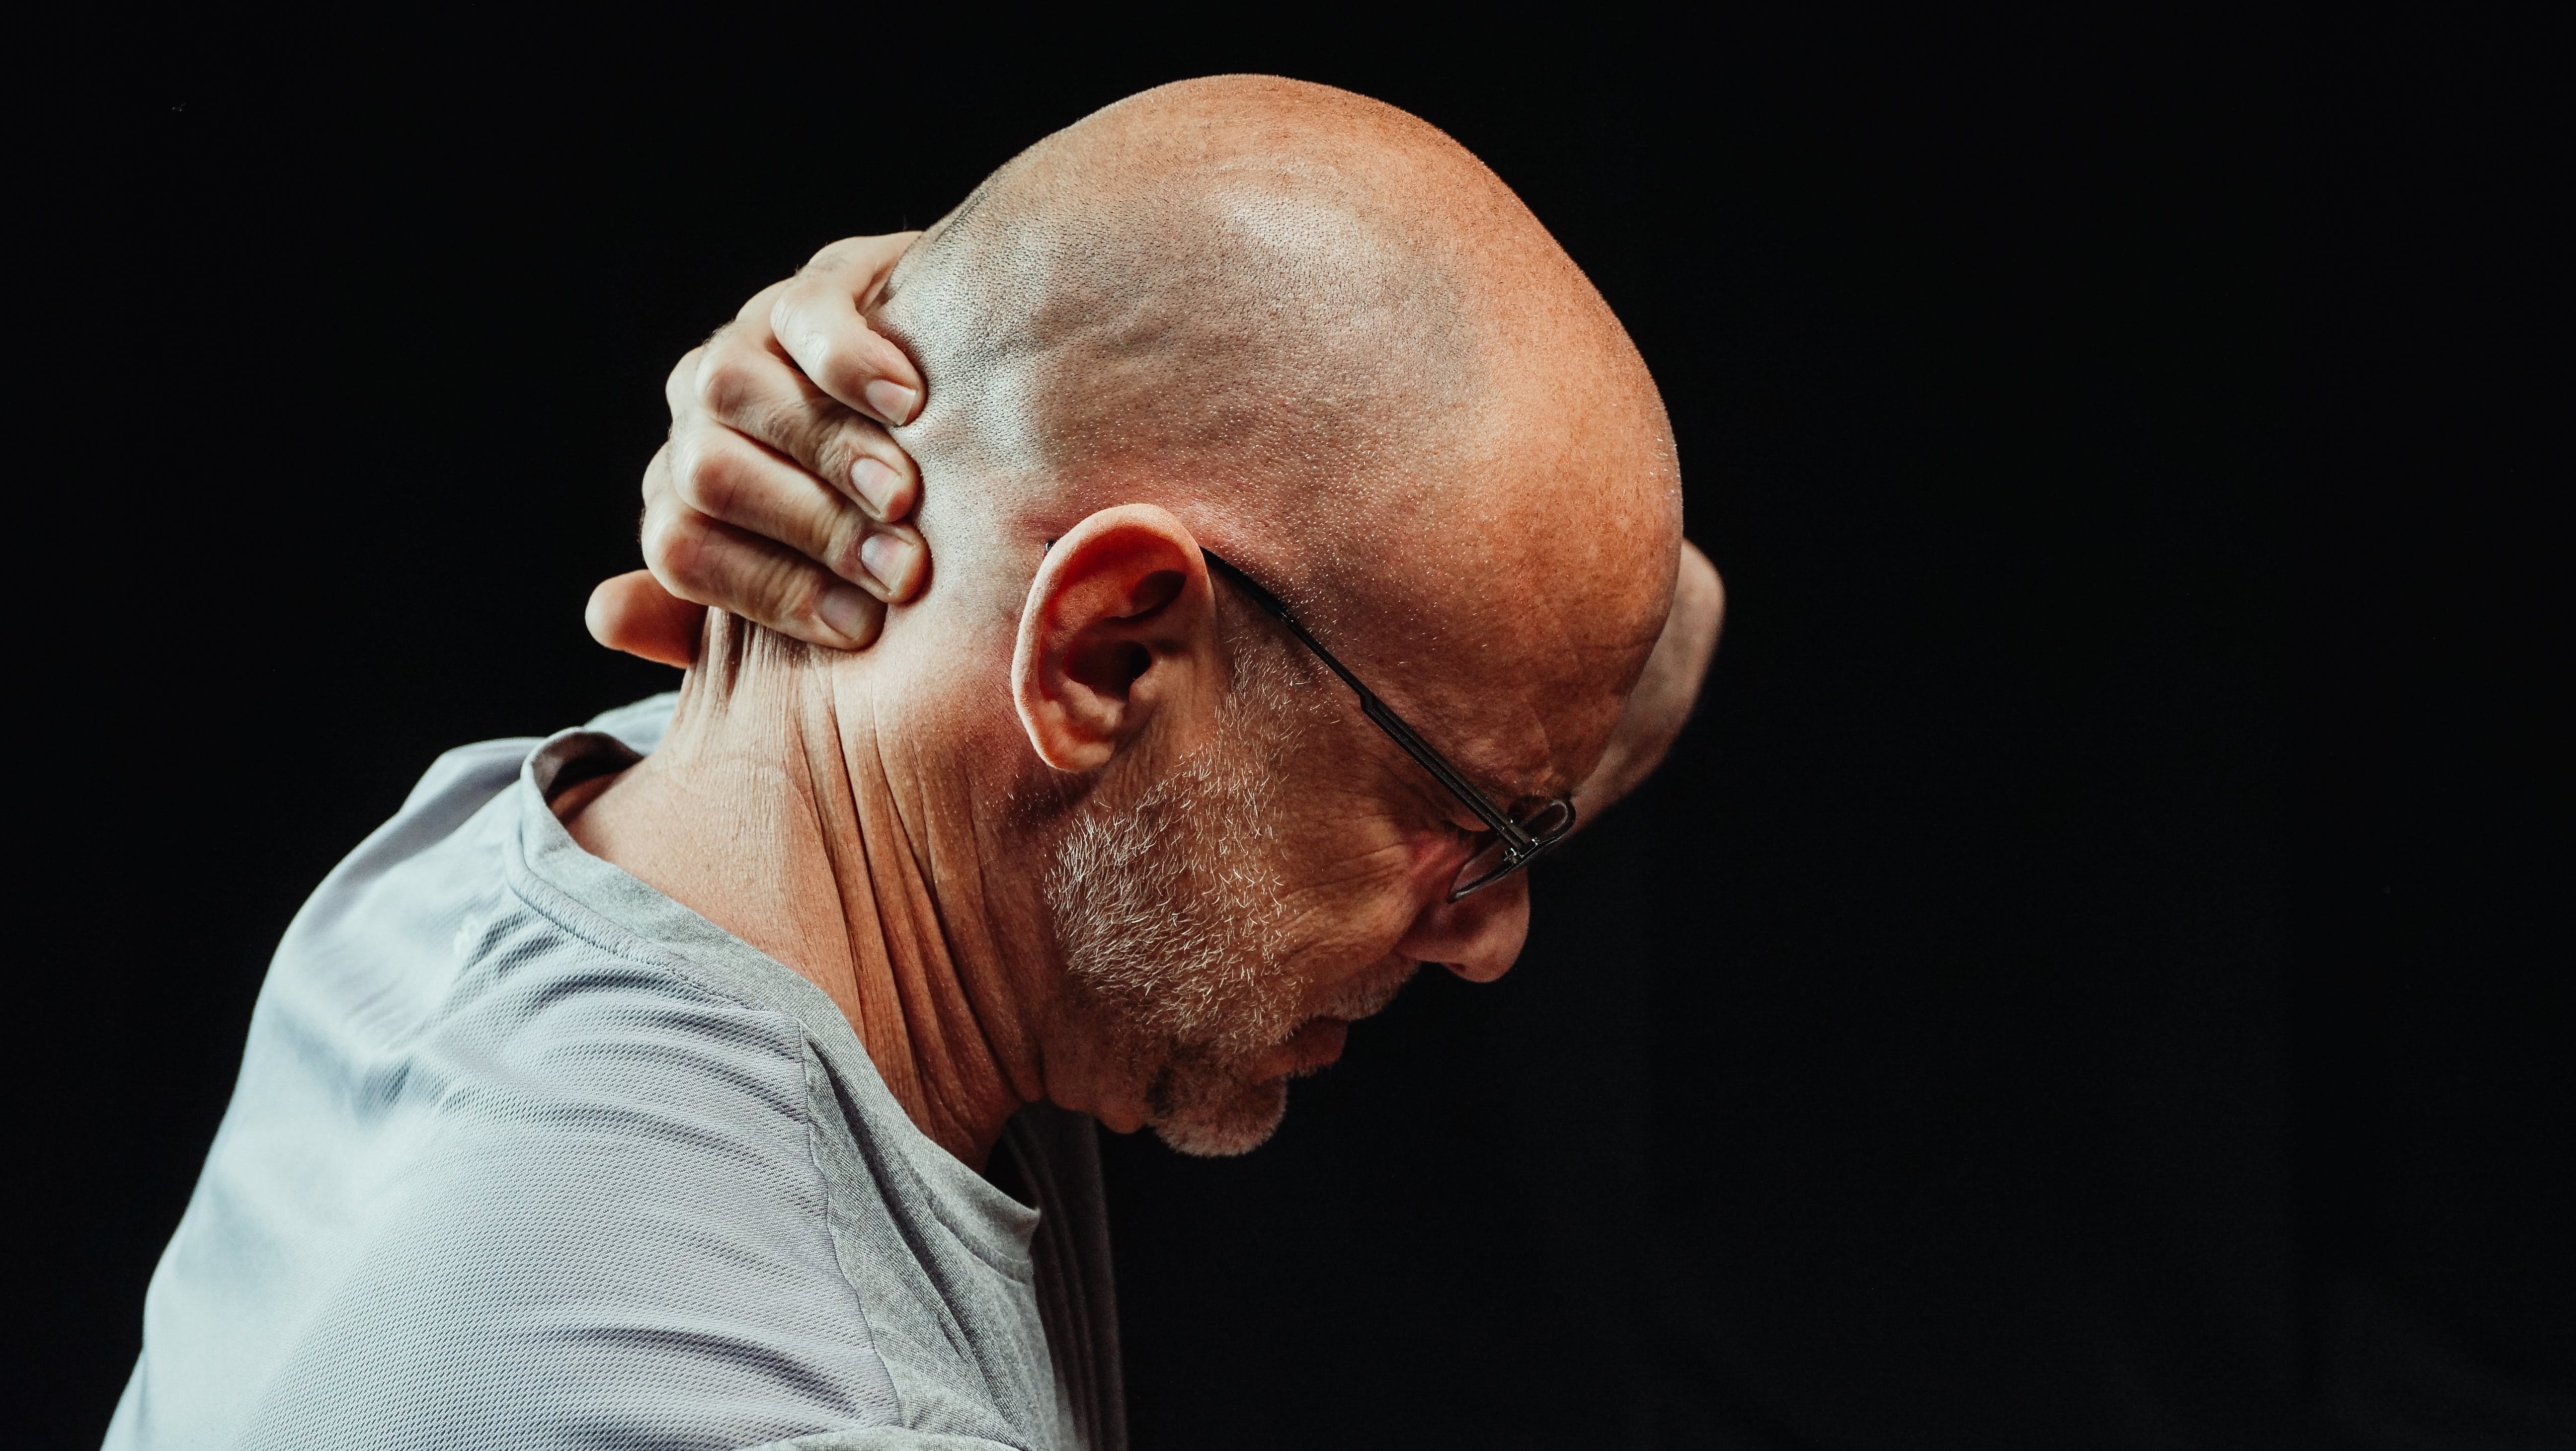 A man experiencing neck pain. | Source: Pexels